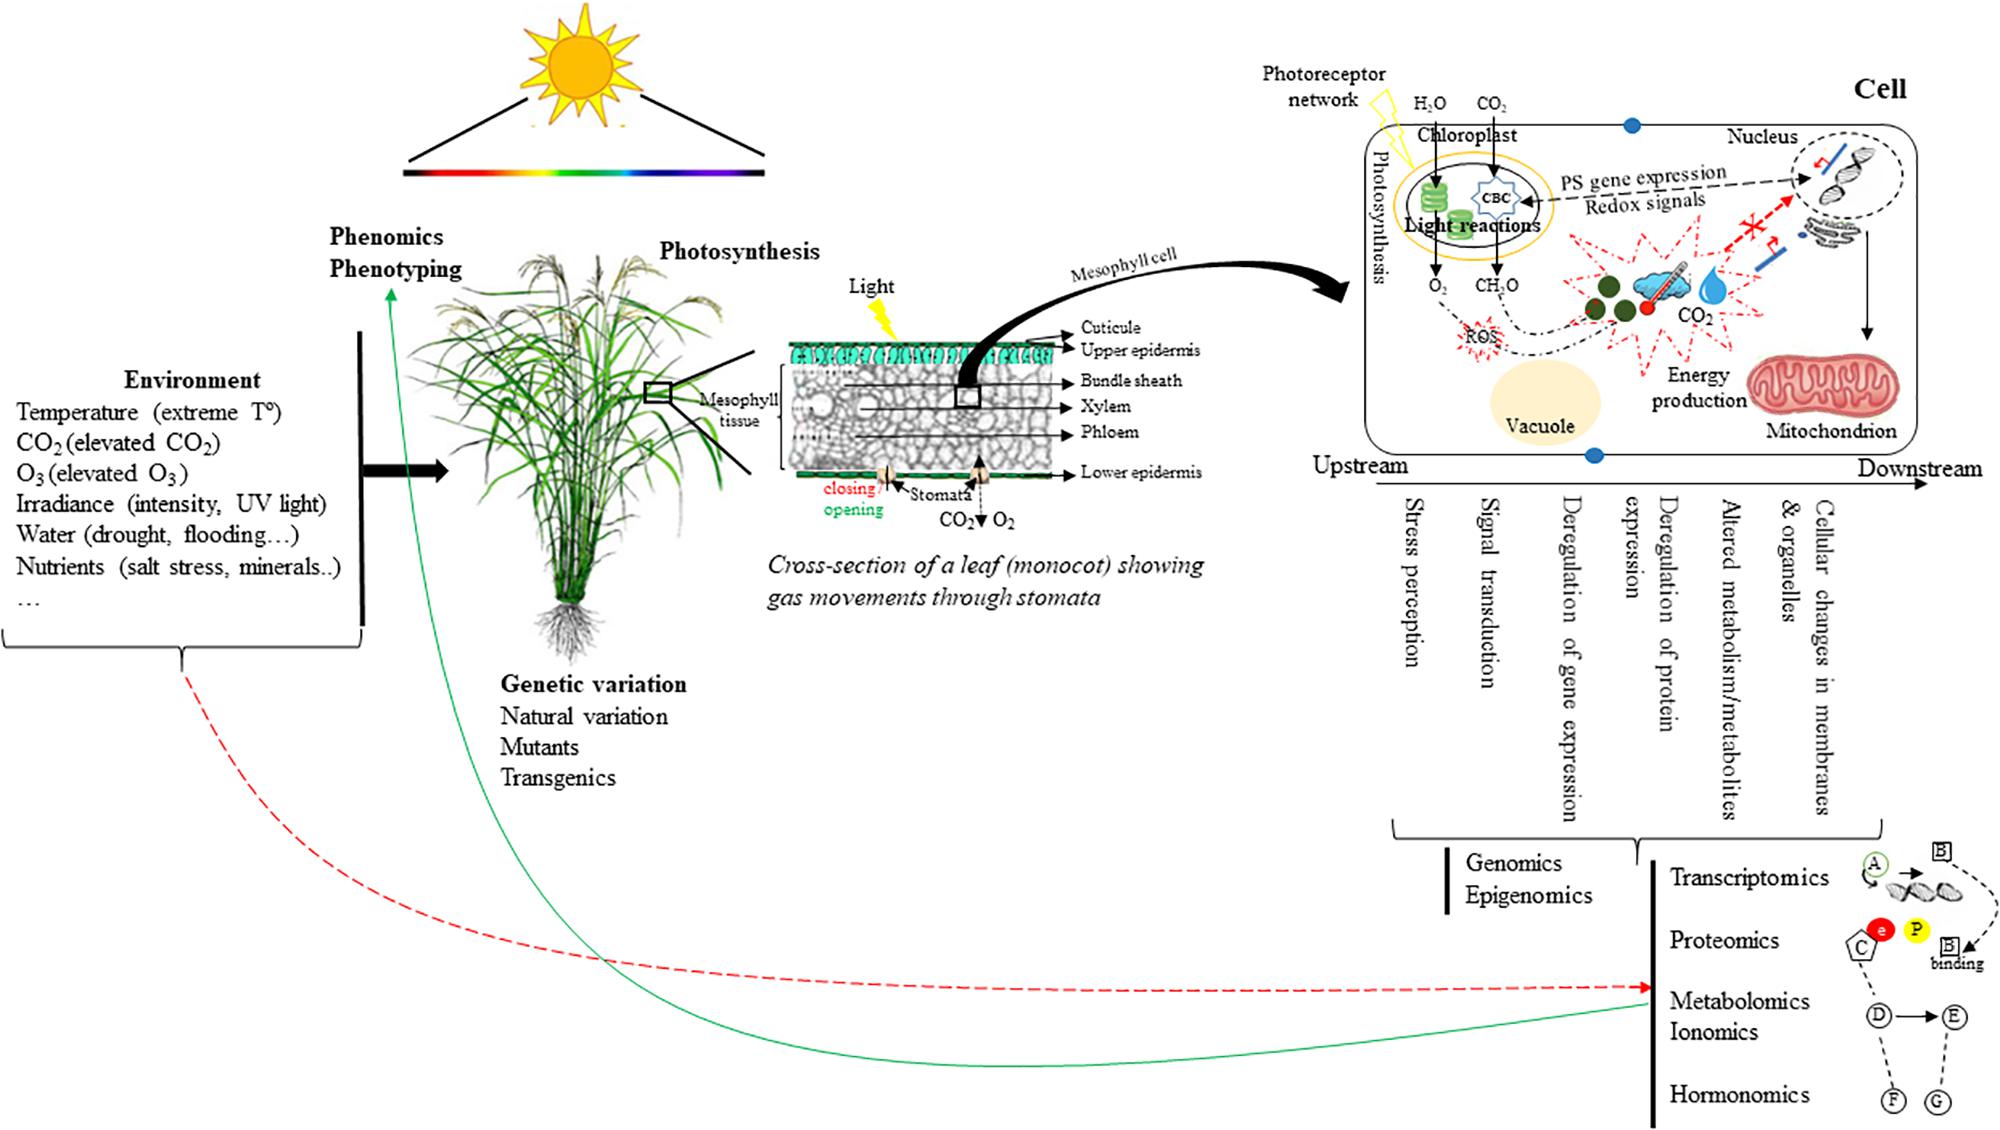 Frontiers Photosynthesis In A Changing Global Climate Scaling Up And Scaling Down In Crops Plant Science